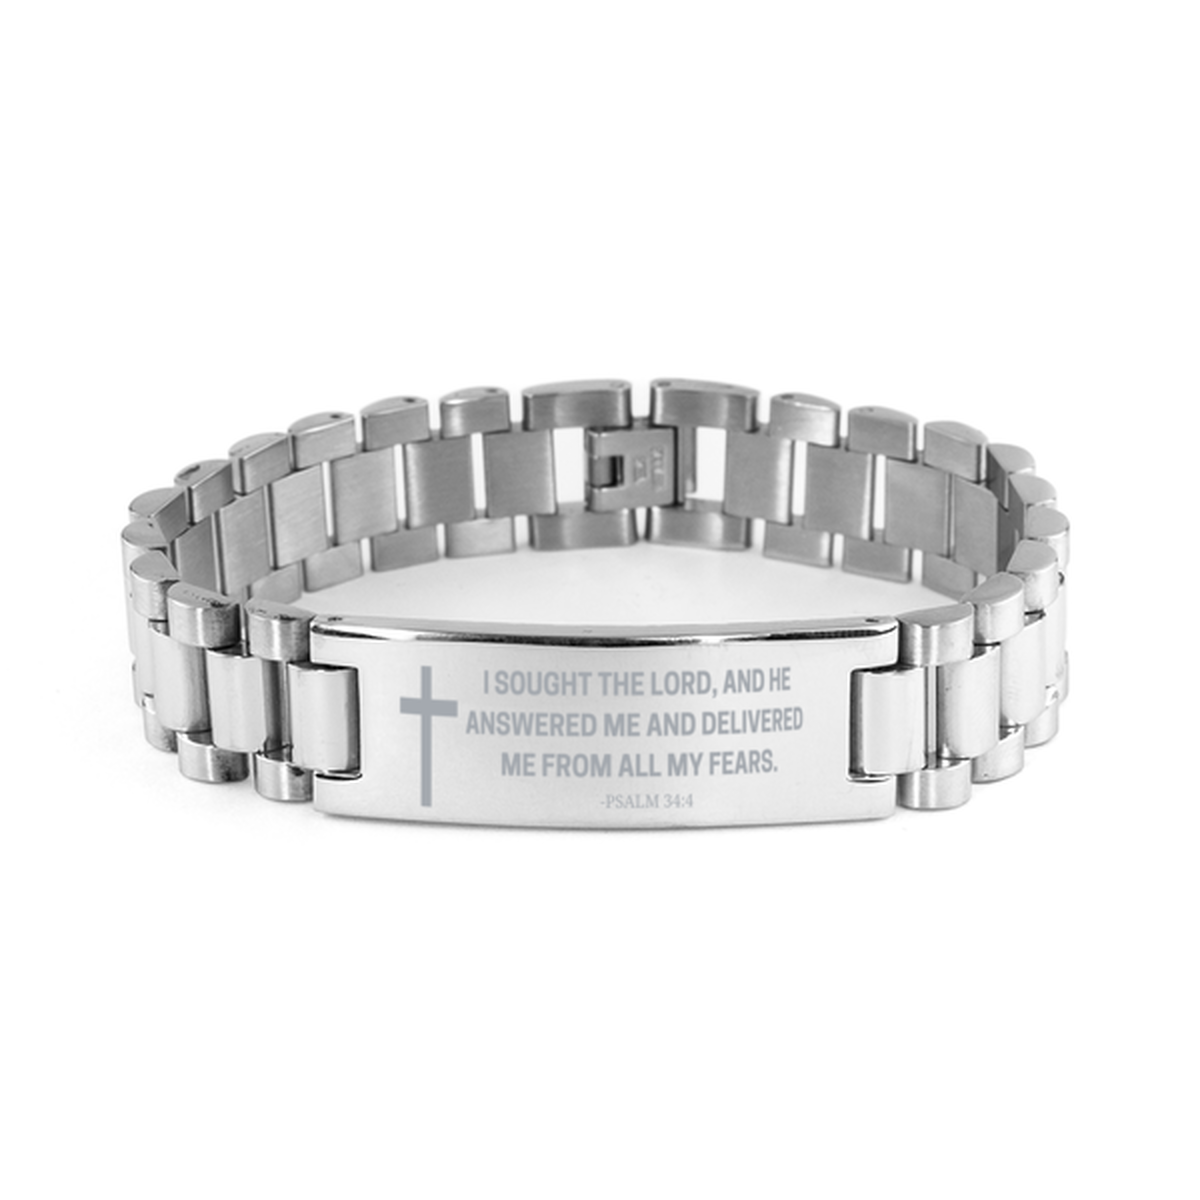 Baptism Gifts For Teenage Boys Girls, Christian Bible Verse Ladder Stainless Steel Bracelet, I sought the Lord, Catholic Confirmation Gifts for Son, Godson, Grandson, Nephew